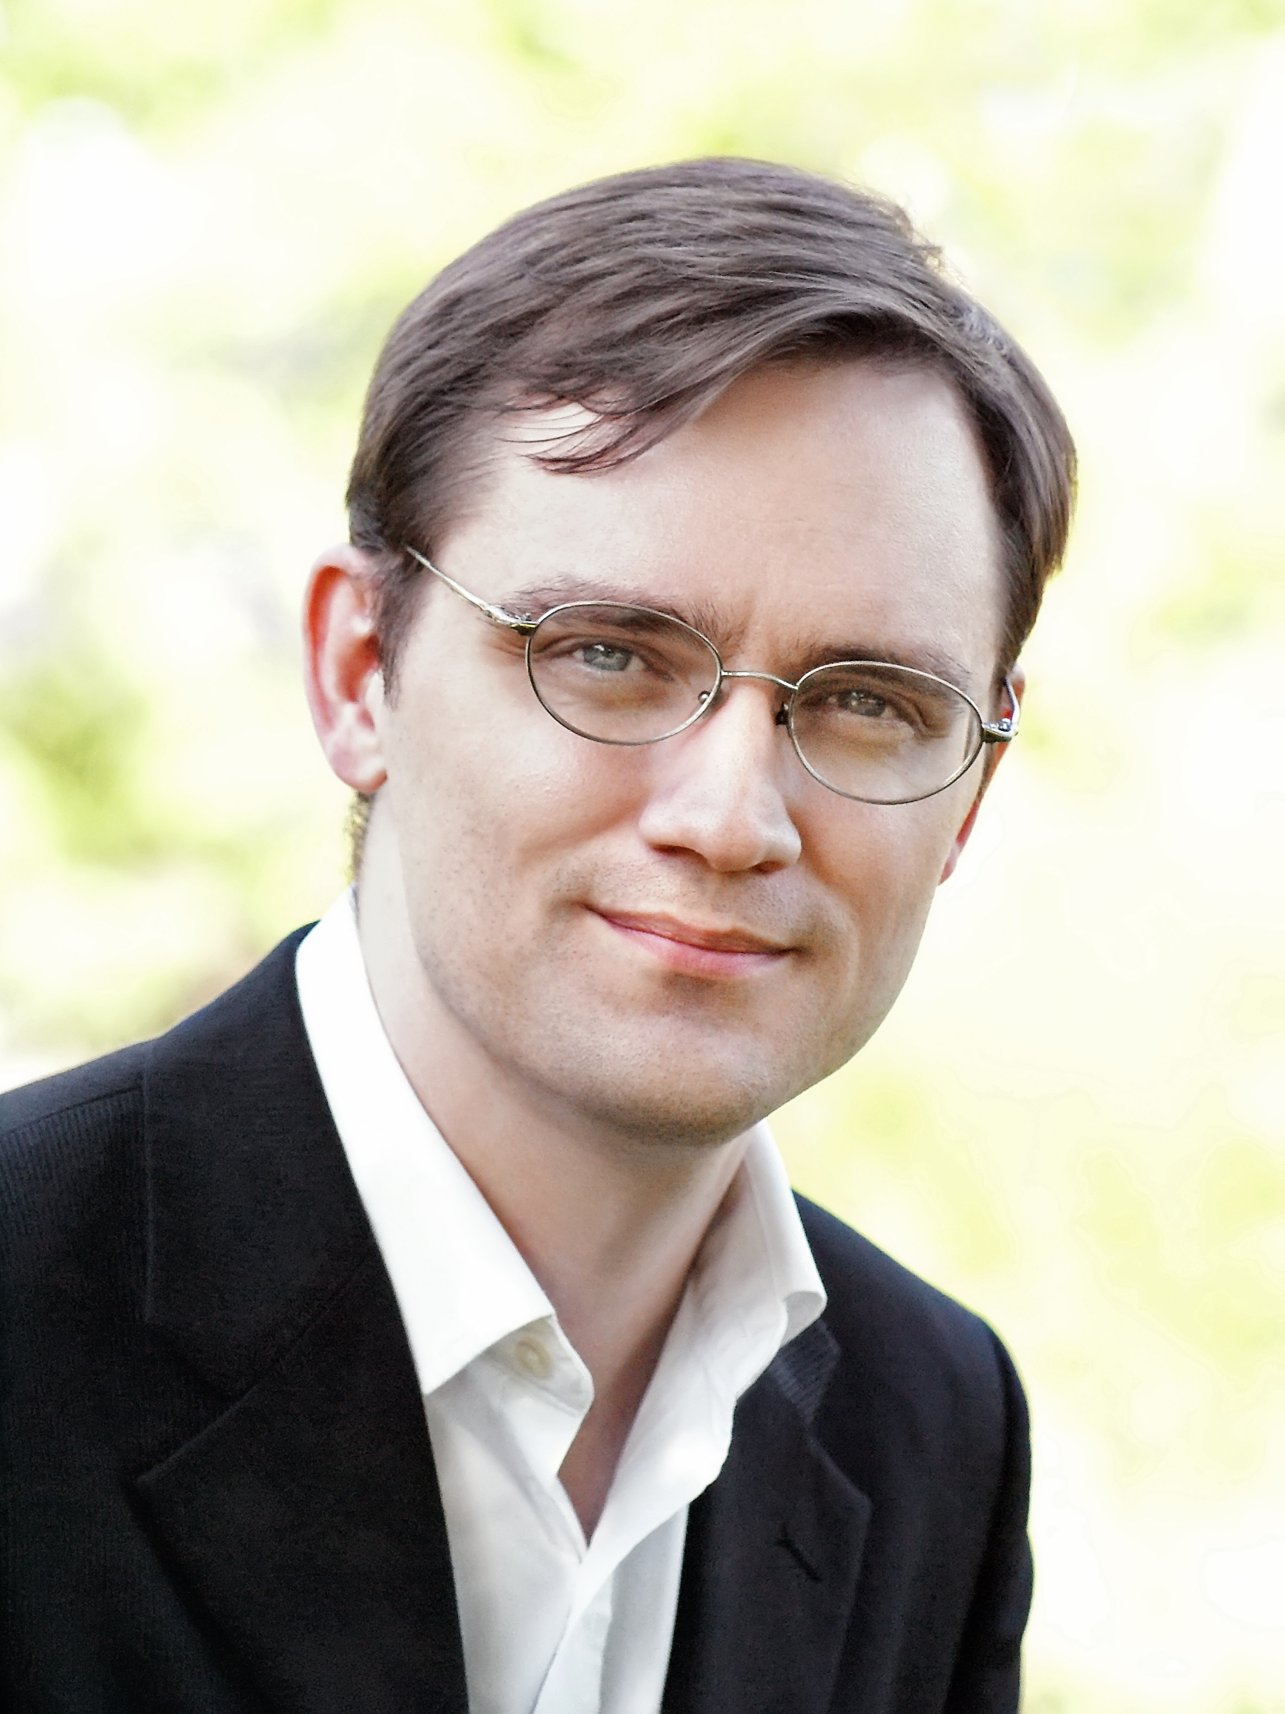 A headshot of smiling Michael D. Adams who has short brown hair, wearing a black suit and glasses with greenery in the background.